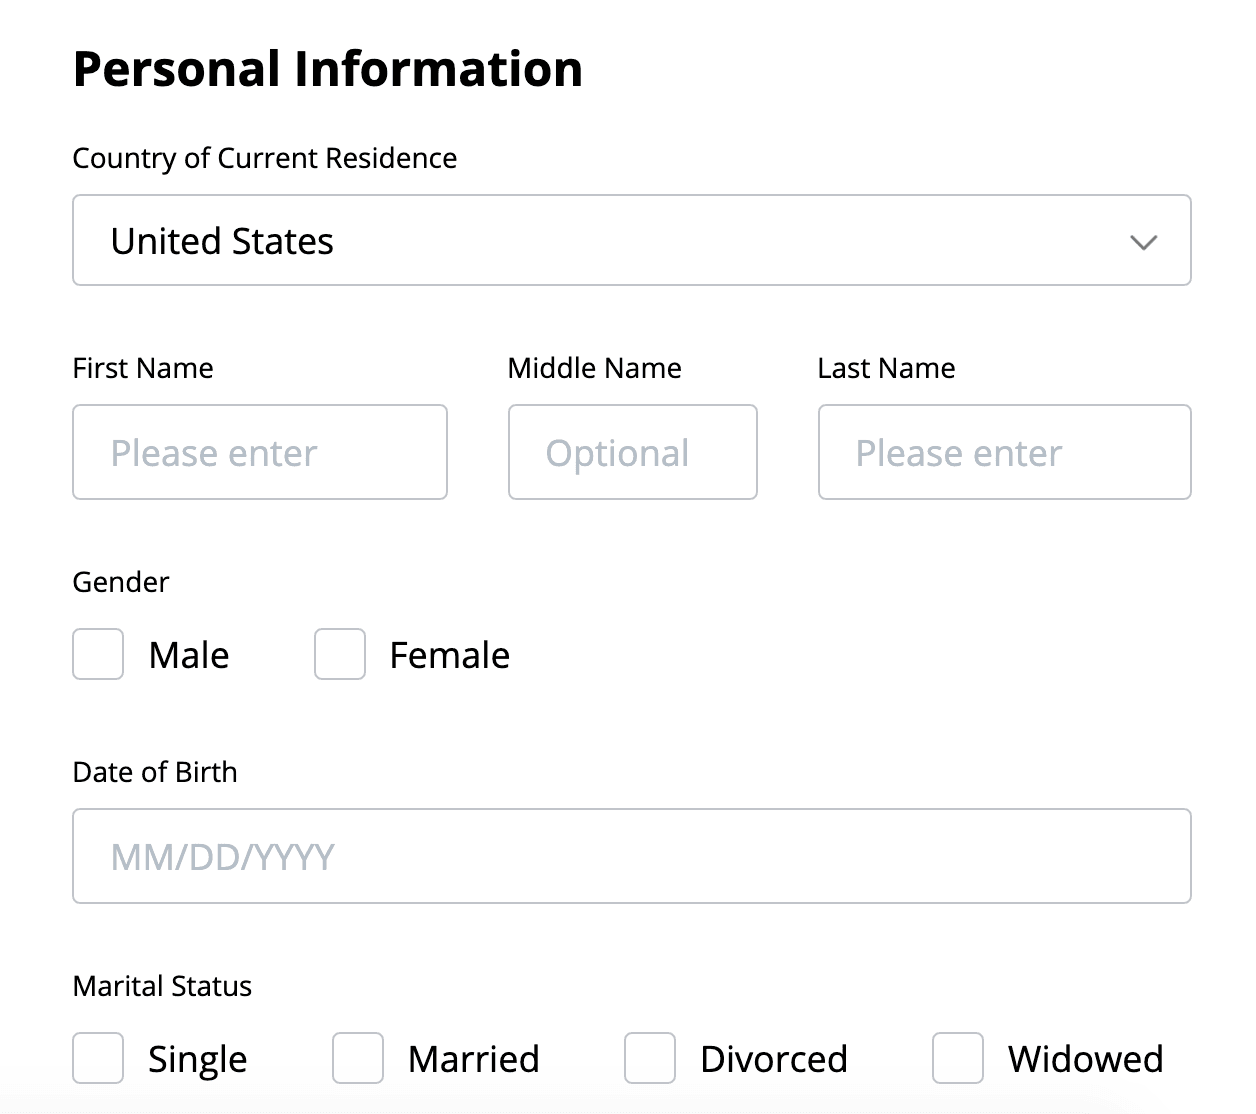 Webull Review: My experience using Webull - Personal Information